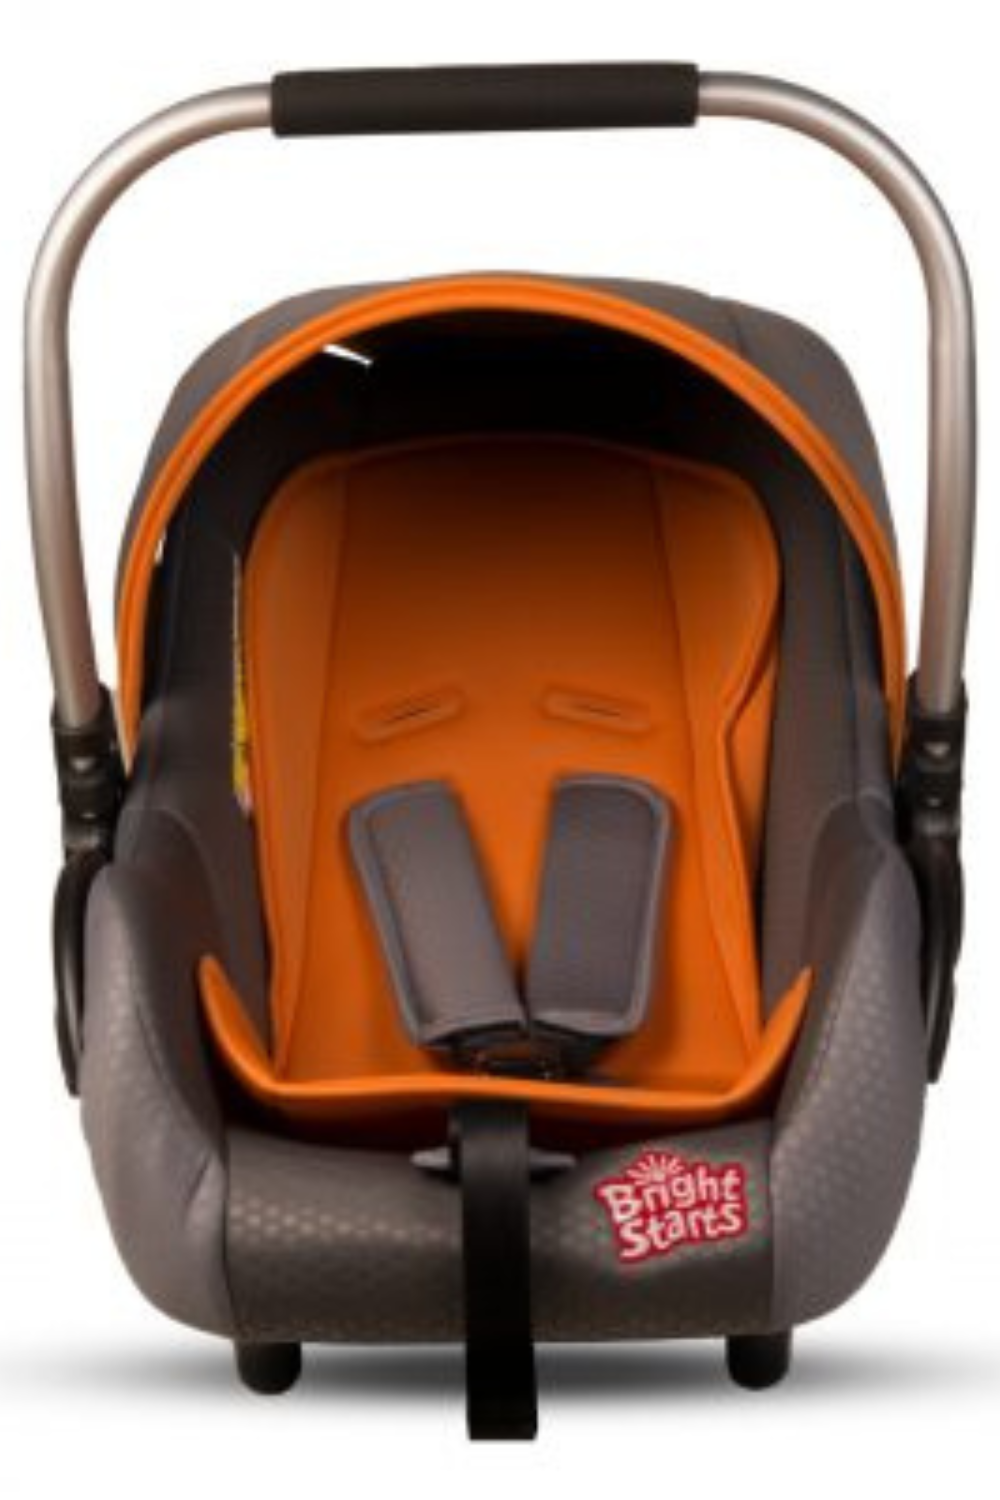 Brightstarts Carry Cot & Car Seat